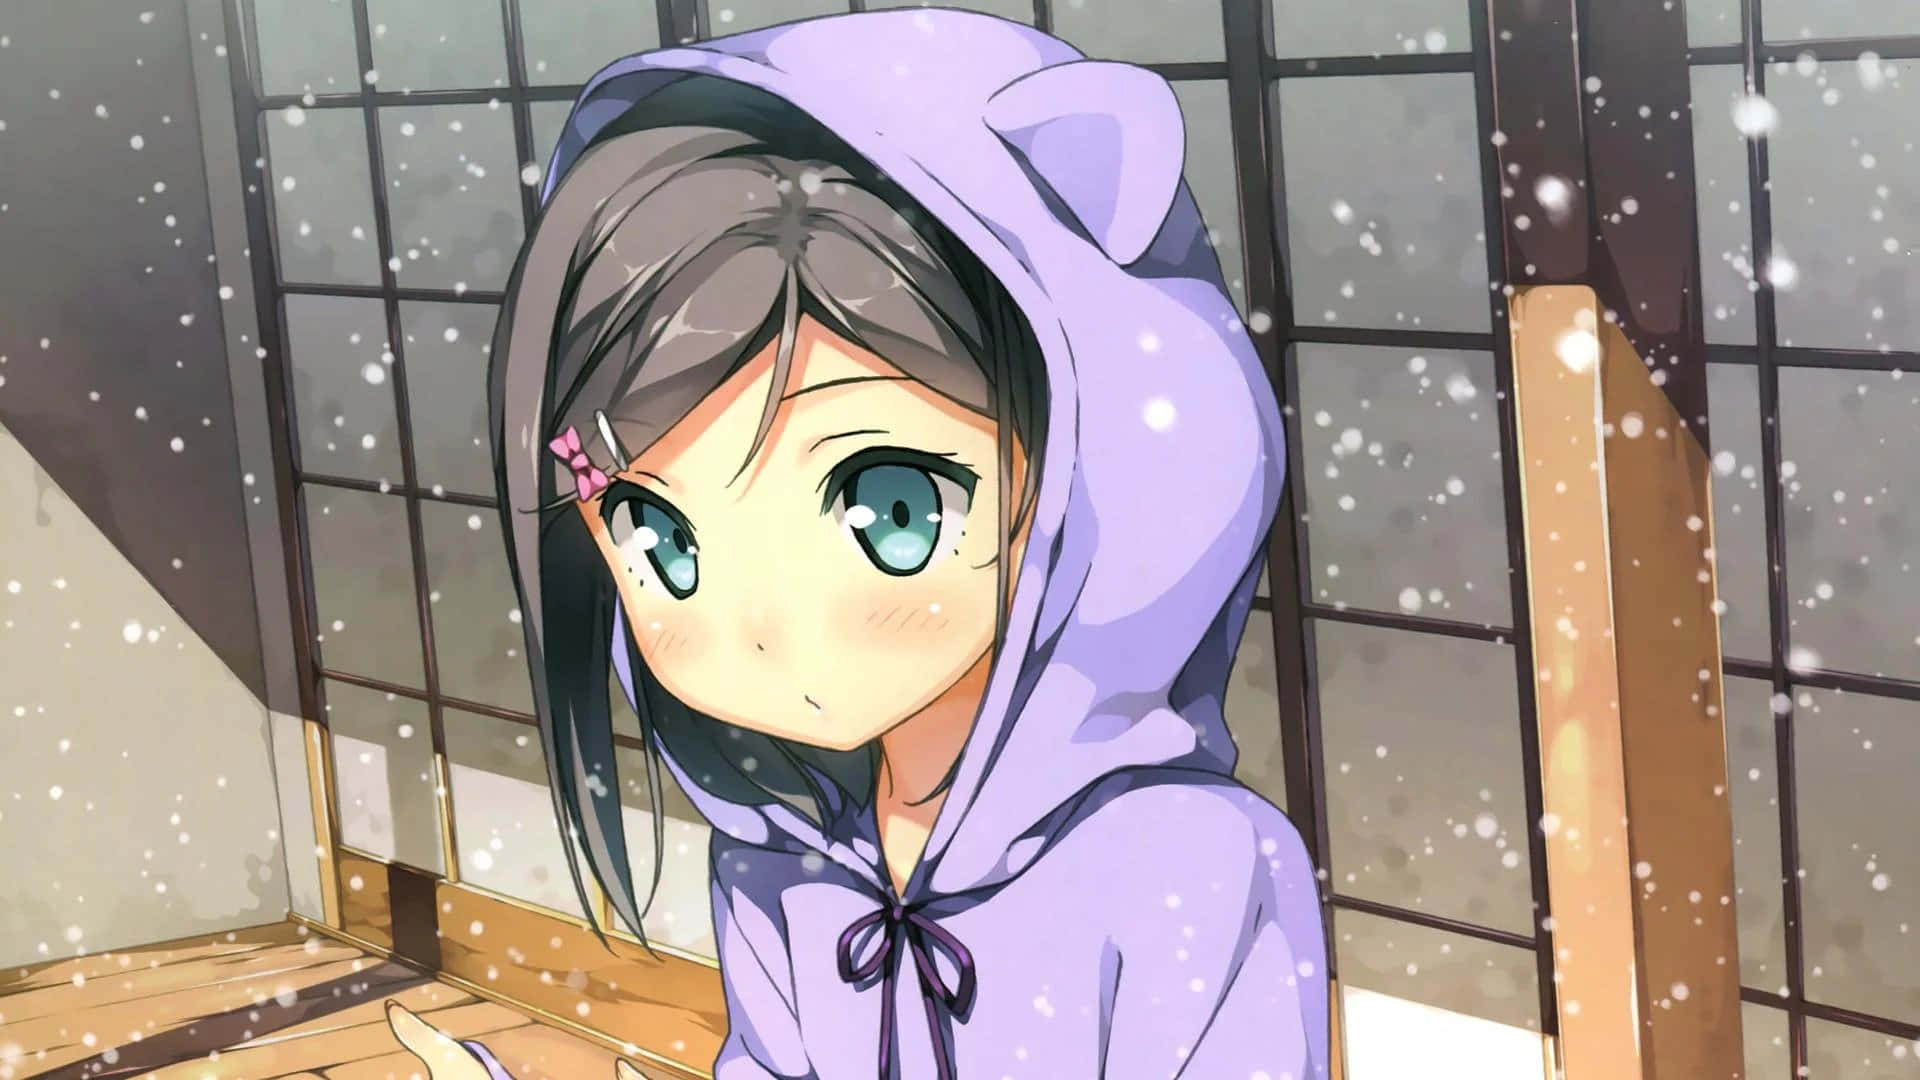 A Girl In A Purple Hoodie Sitting On A Wooden Floor